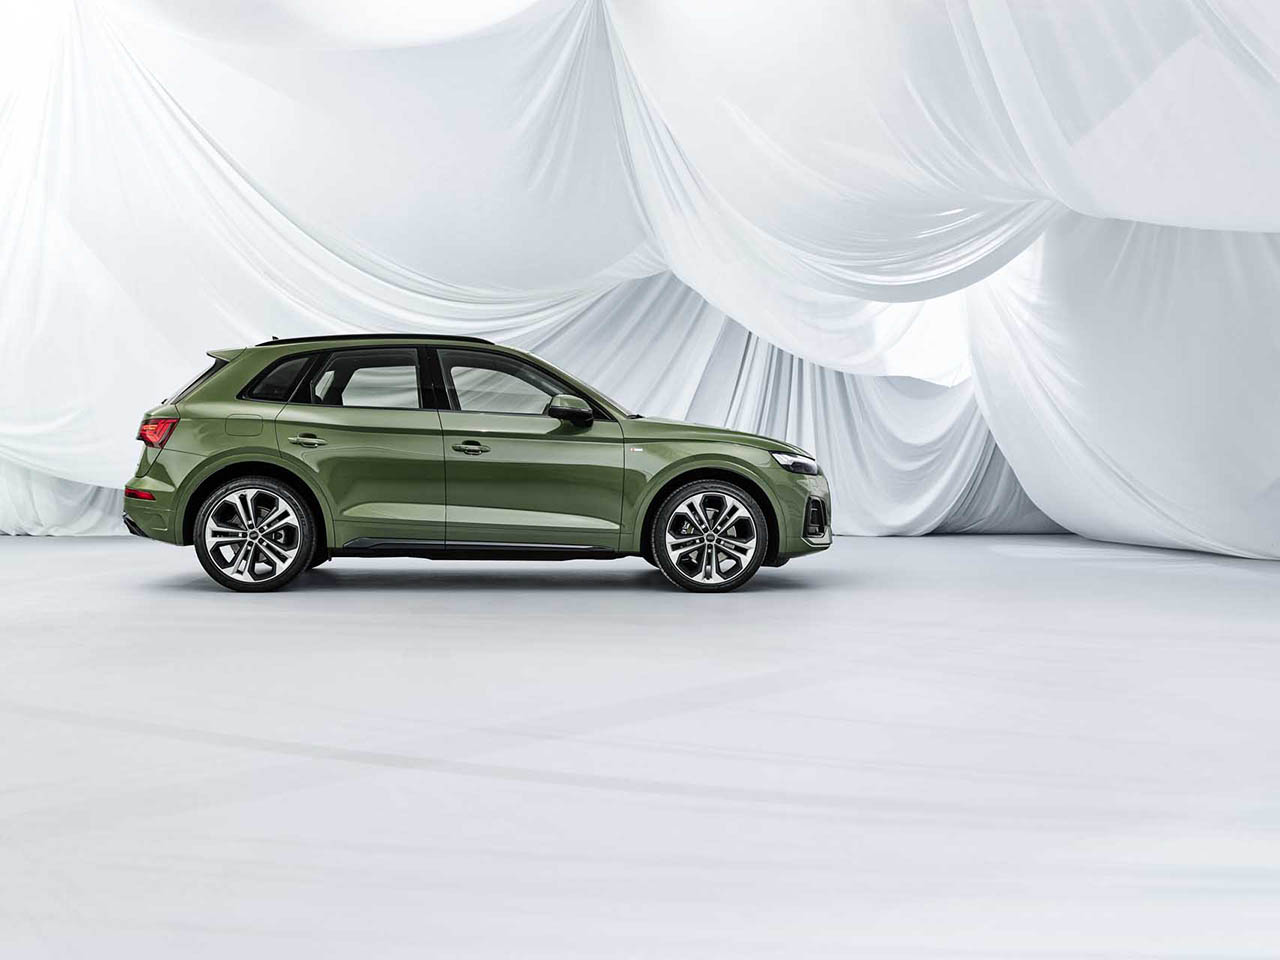 Audi Q5 SUV facelifted for 2020